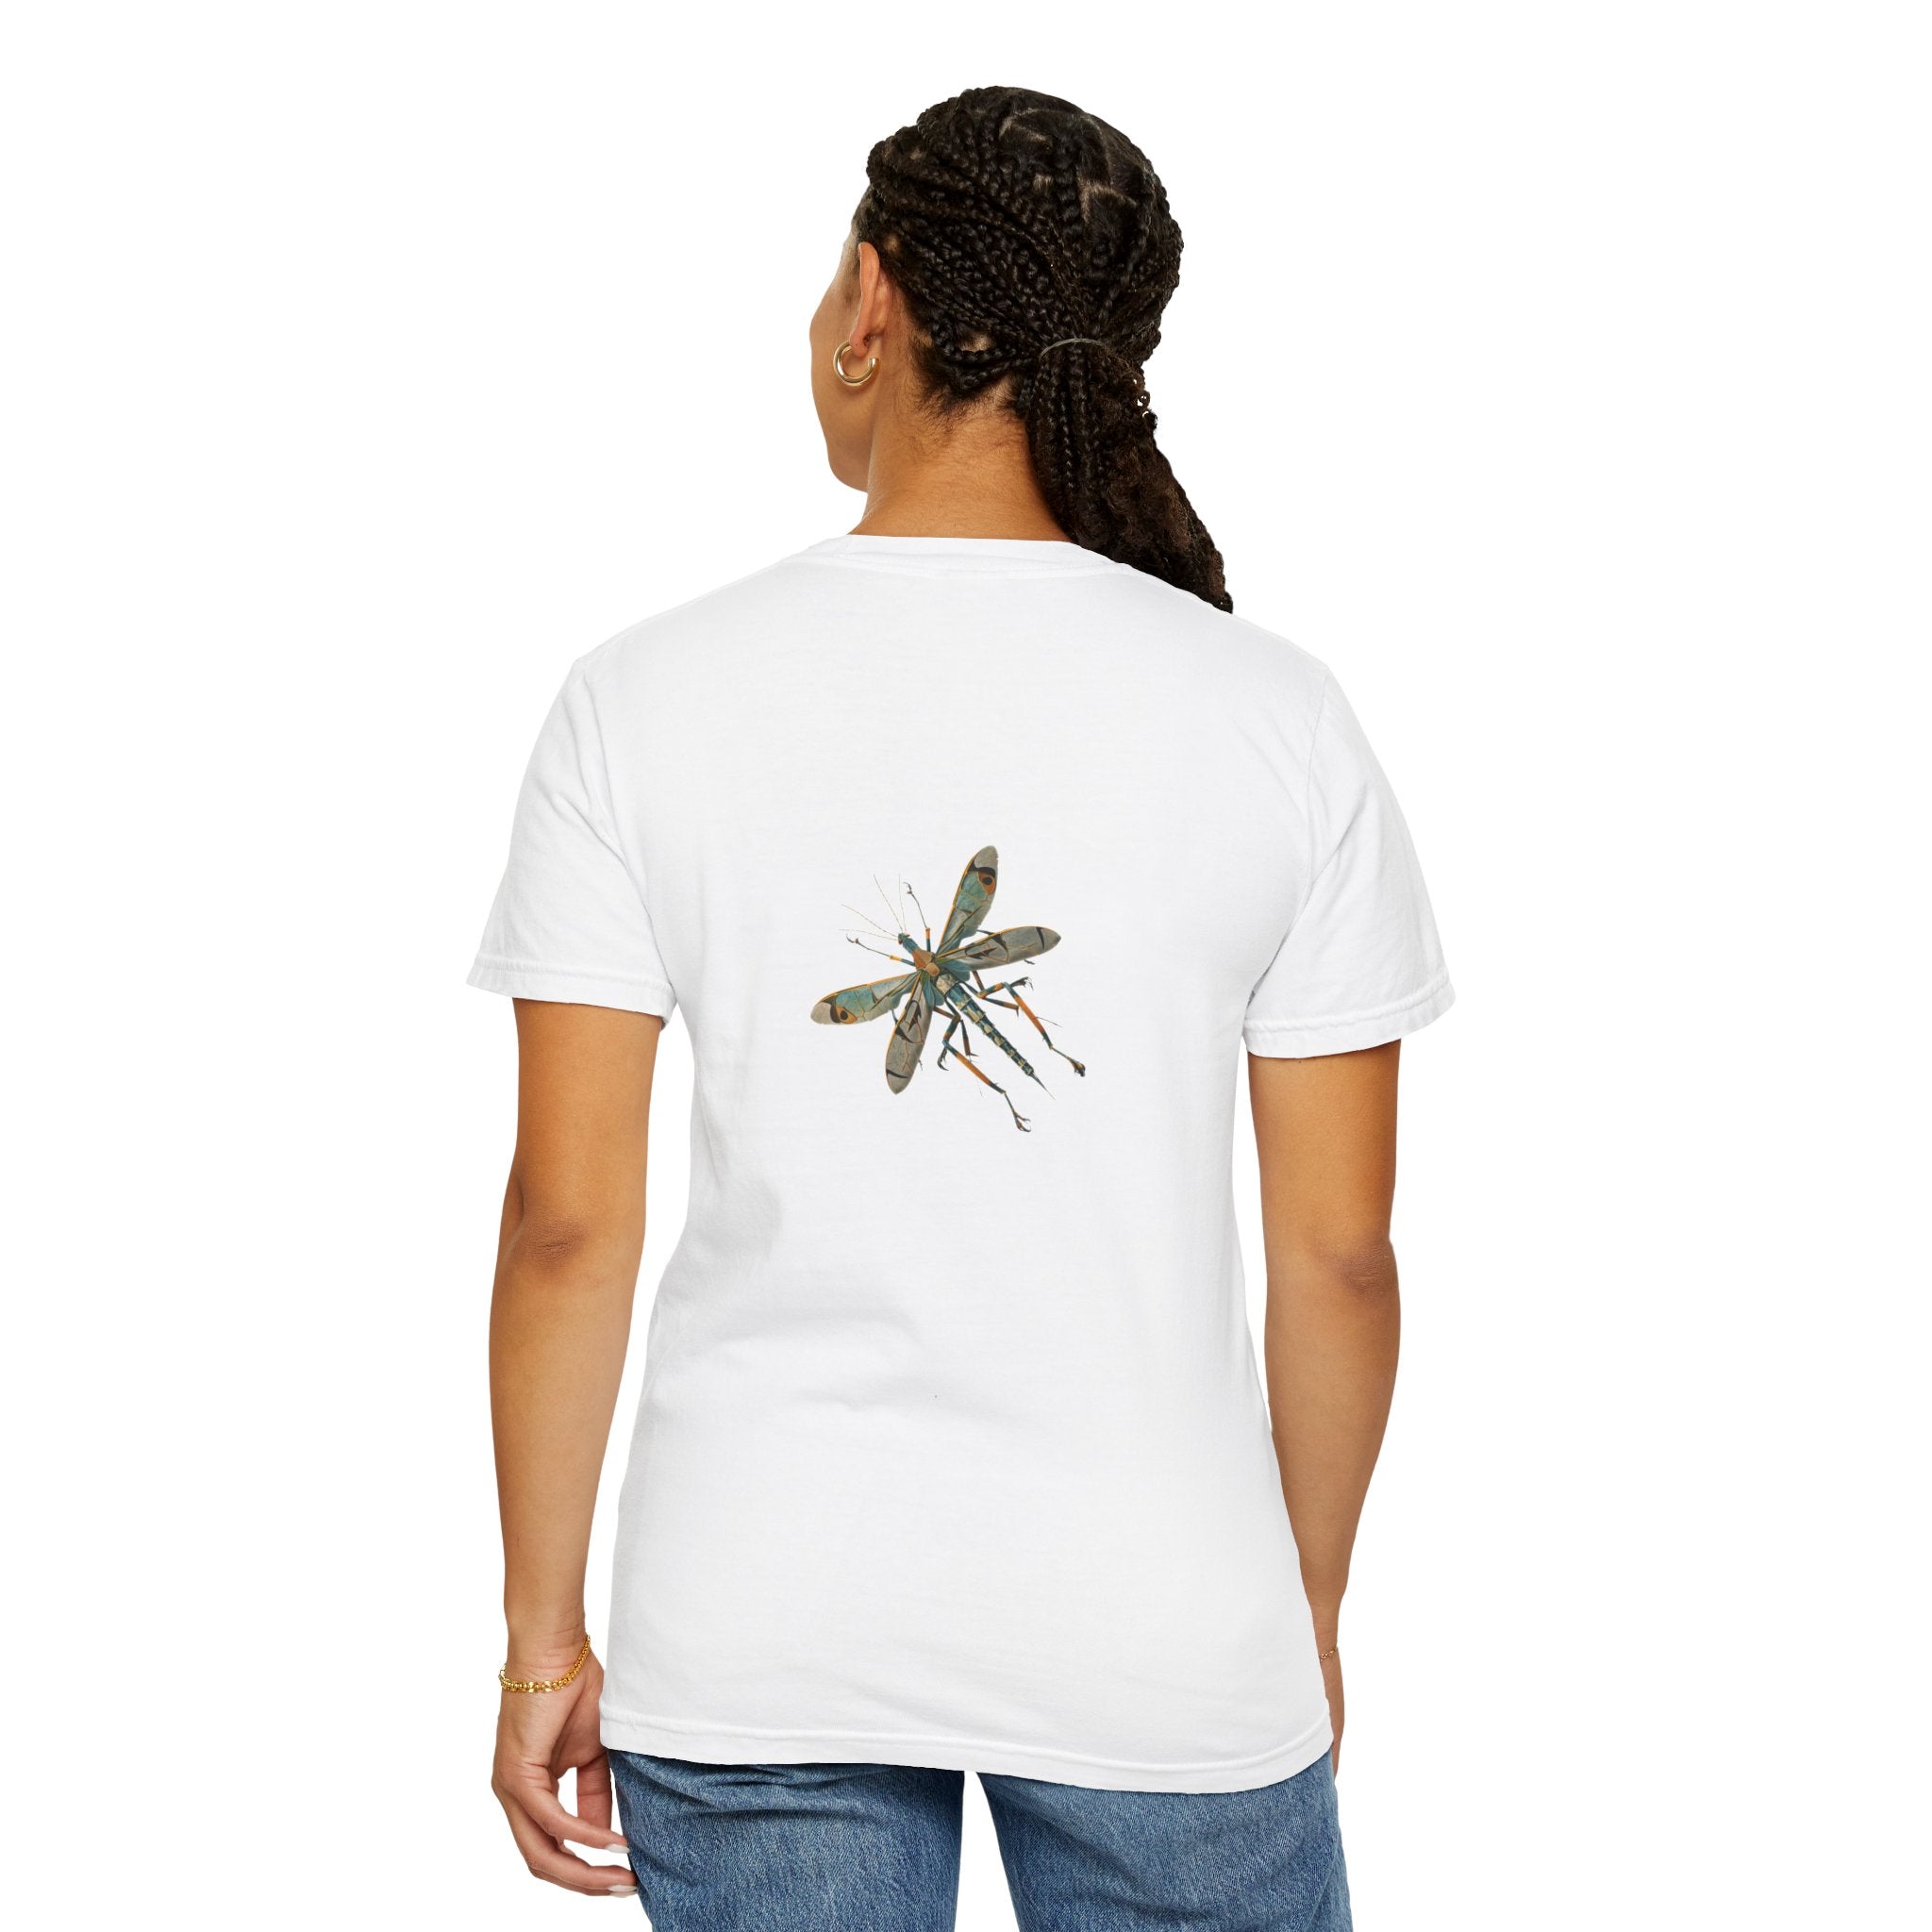 Humorous back bug t-shirt, unisex prank tee, garment-dyed funny shirt, realistic bug illustration top, casual conversation starter tee, quirky unisex garment, playful bug on back shirt, funny gift idea t-shirt, soft vintage look tee, comfortable humorous clothing, durable prank shirt, cheeky bug design t-shirt, no-shrink fun tee, lightweight humorous top, social event funny shirt